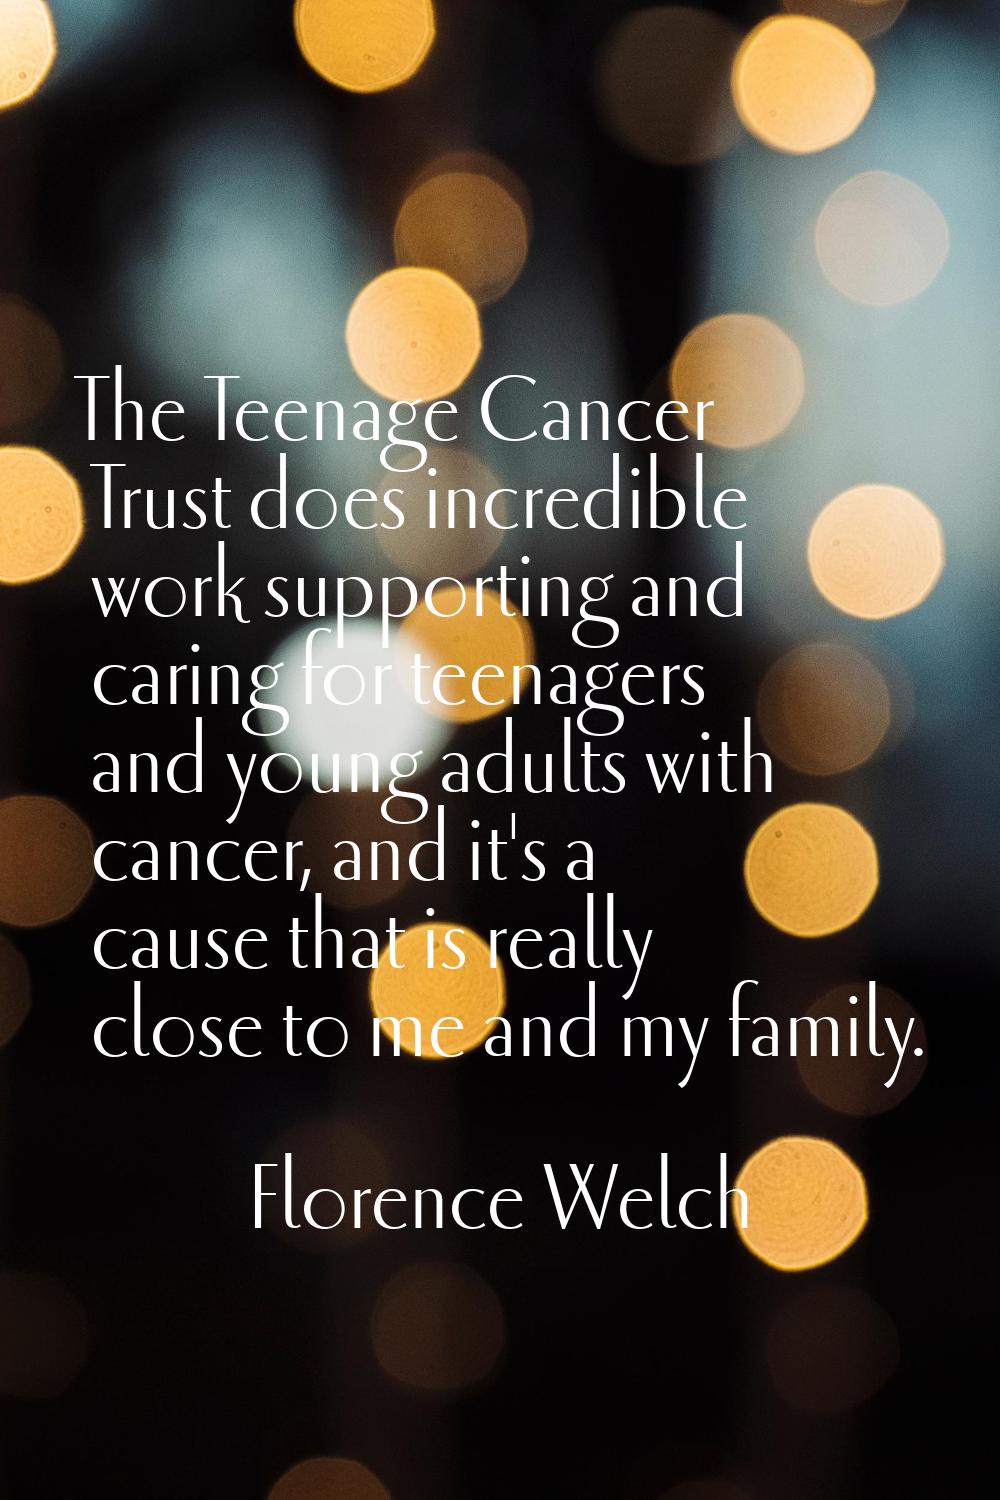 The Teenage Cancer Trust does incredible work supporting and caring for teenagers and young adults 